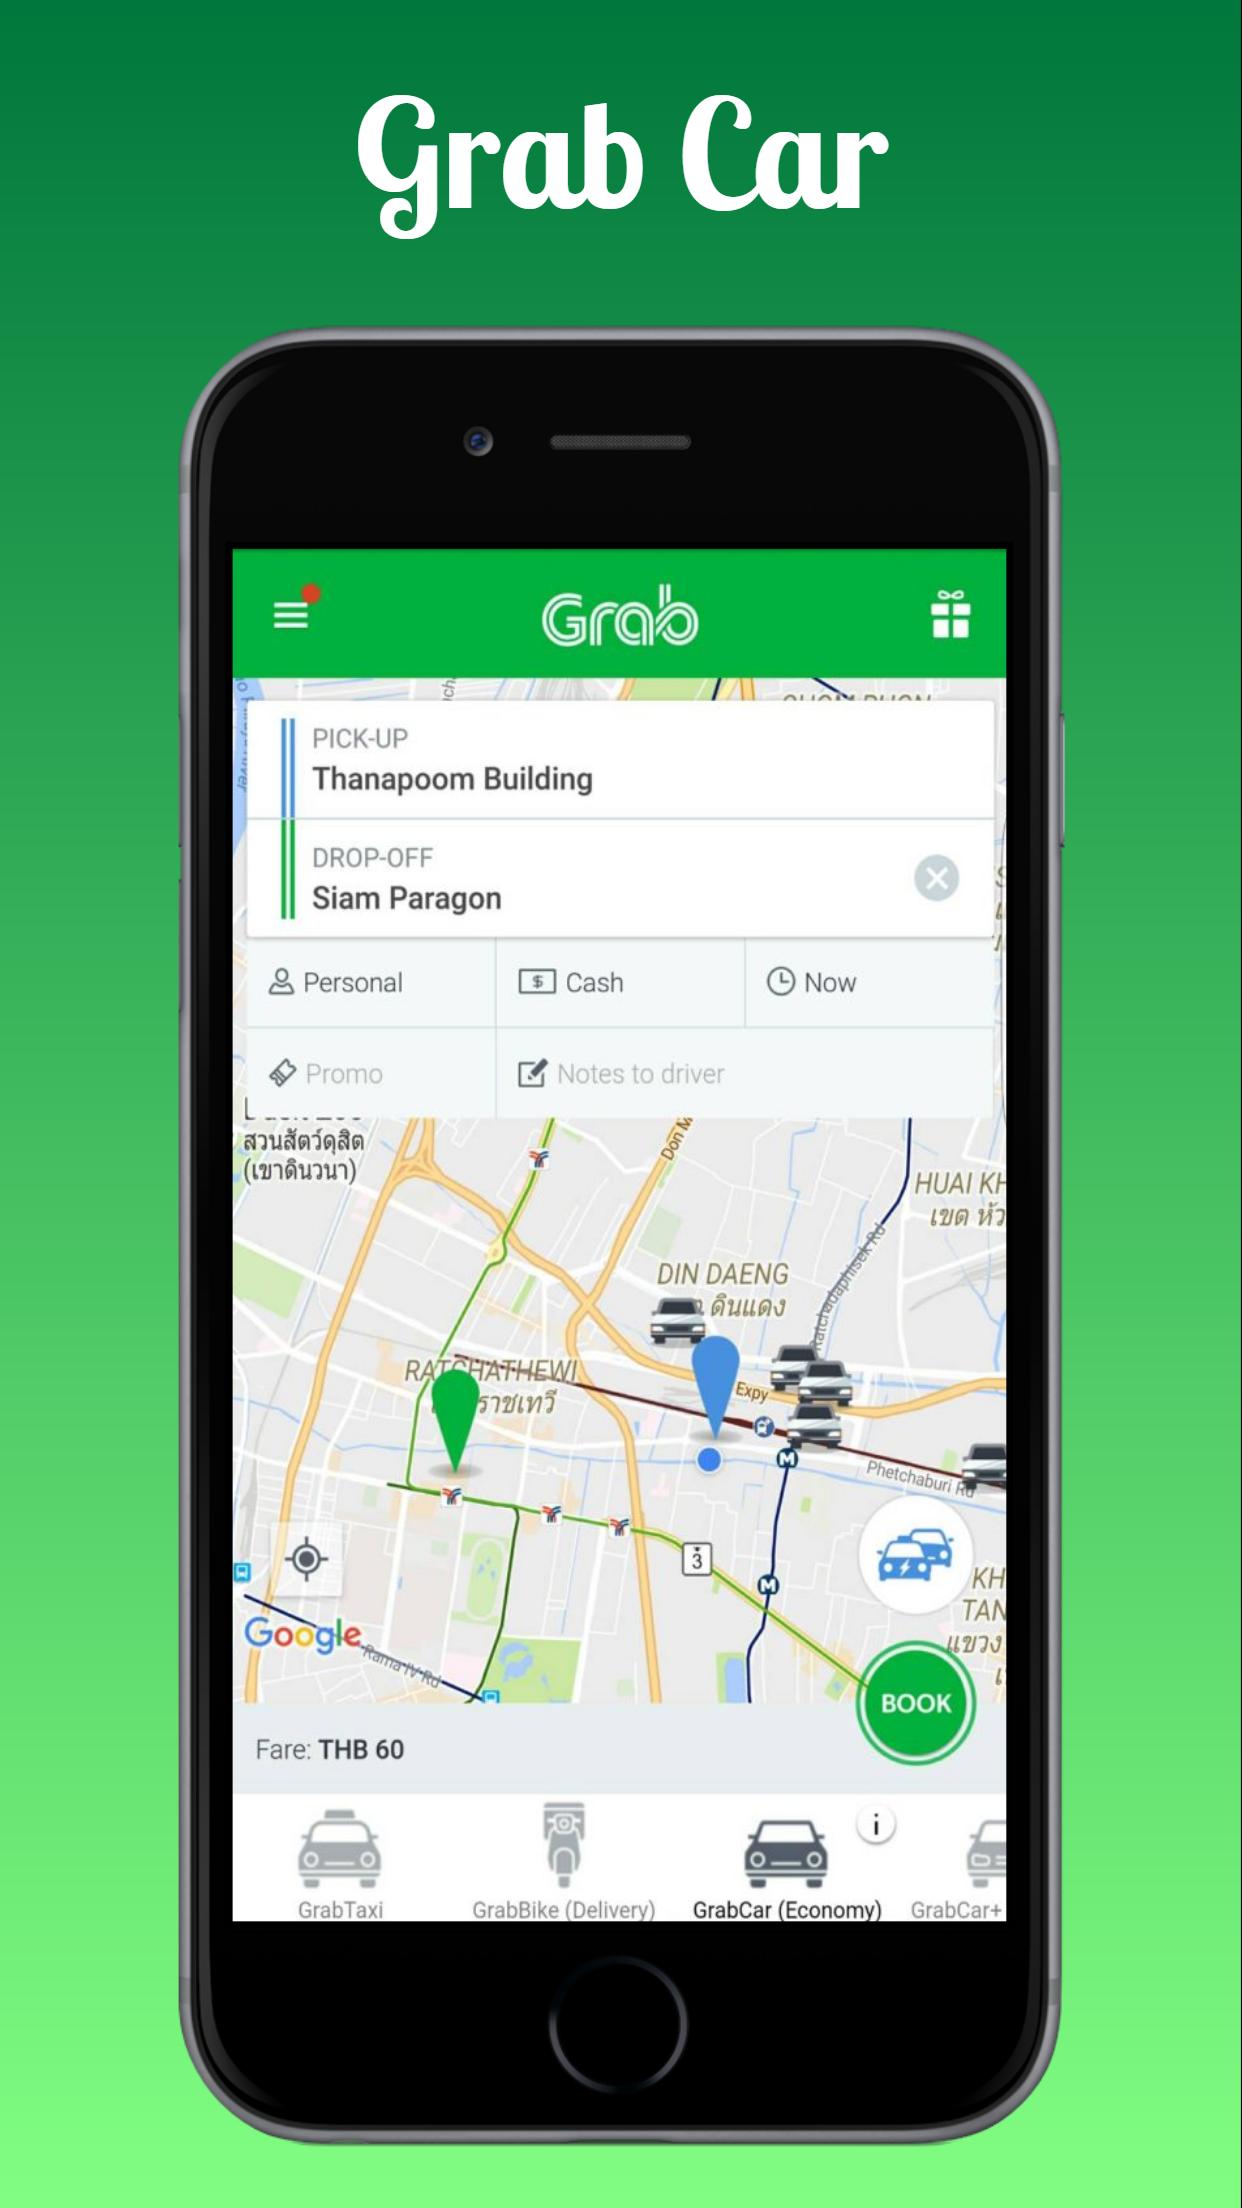 Advance Transportation Coupon Promo Code Guide For Android Apk Download